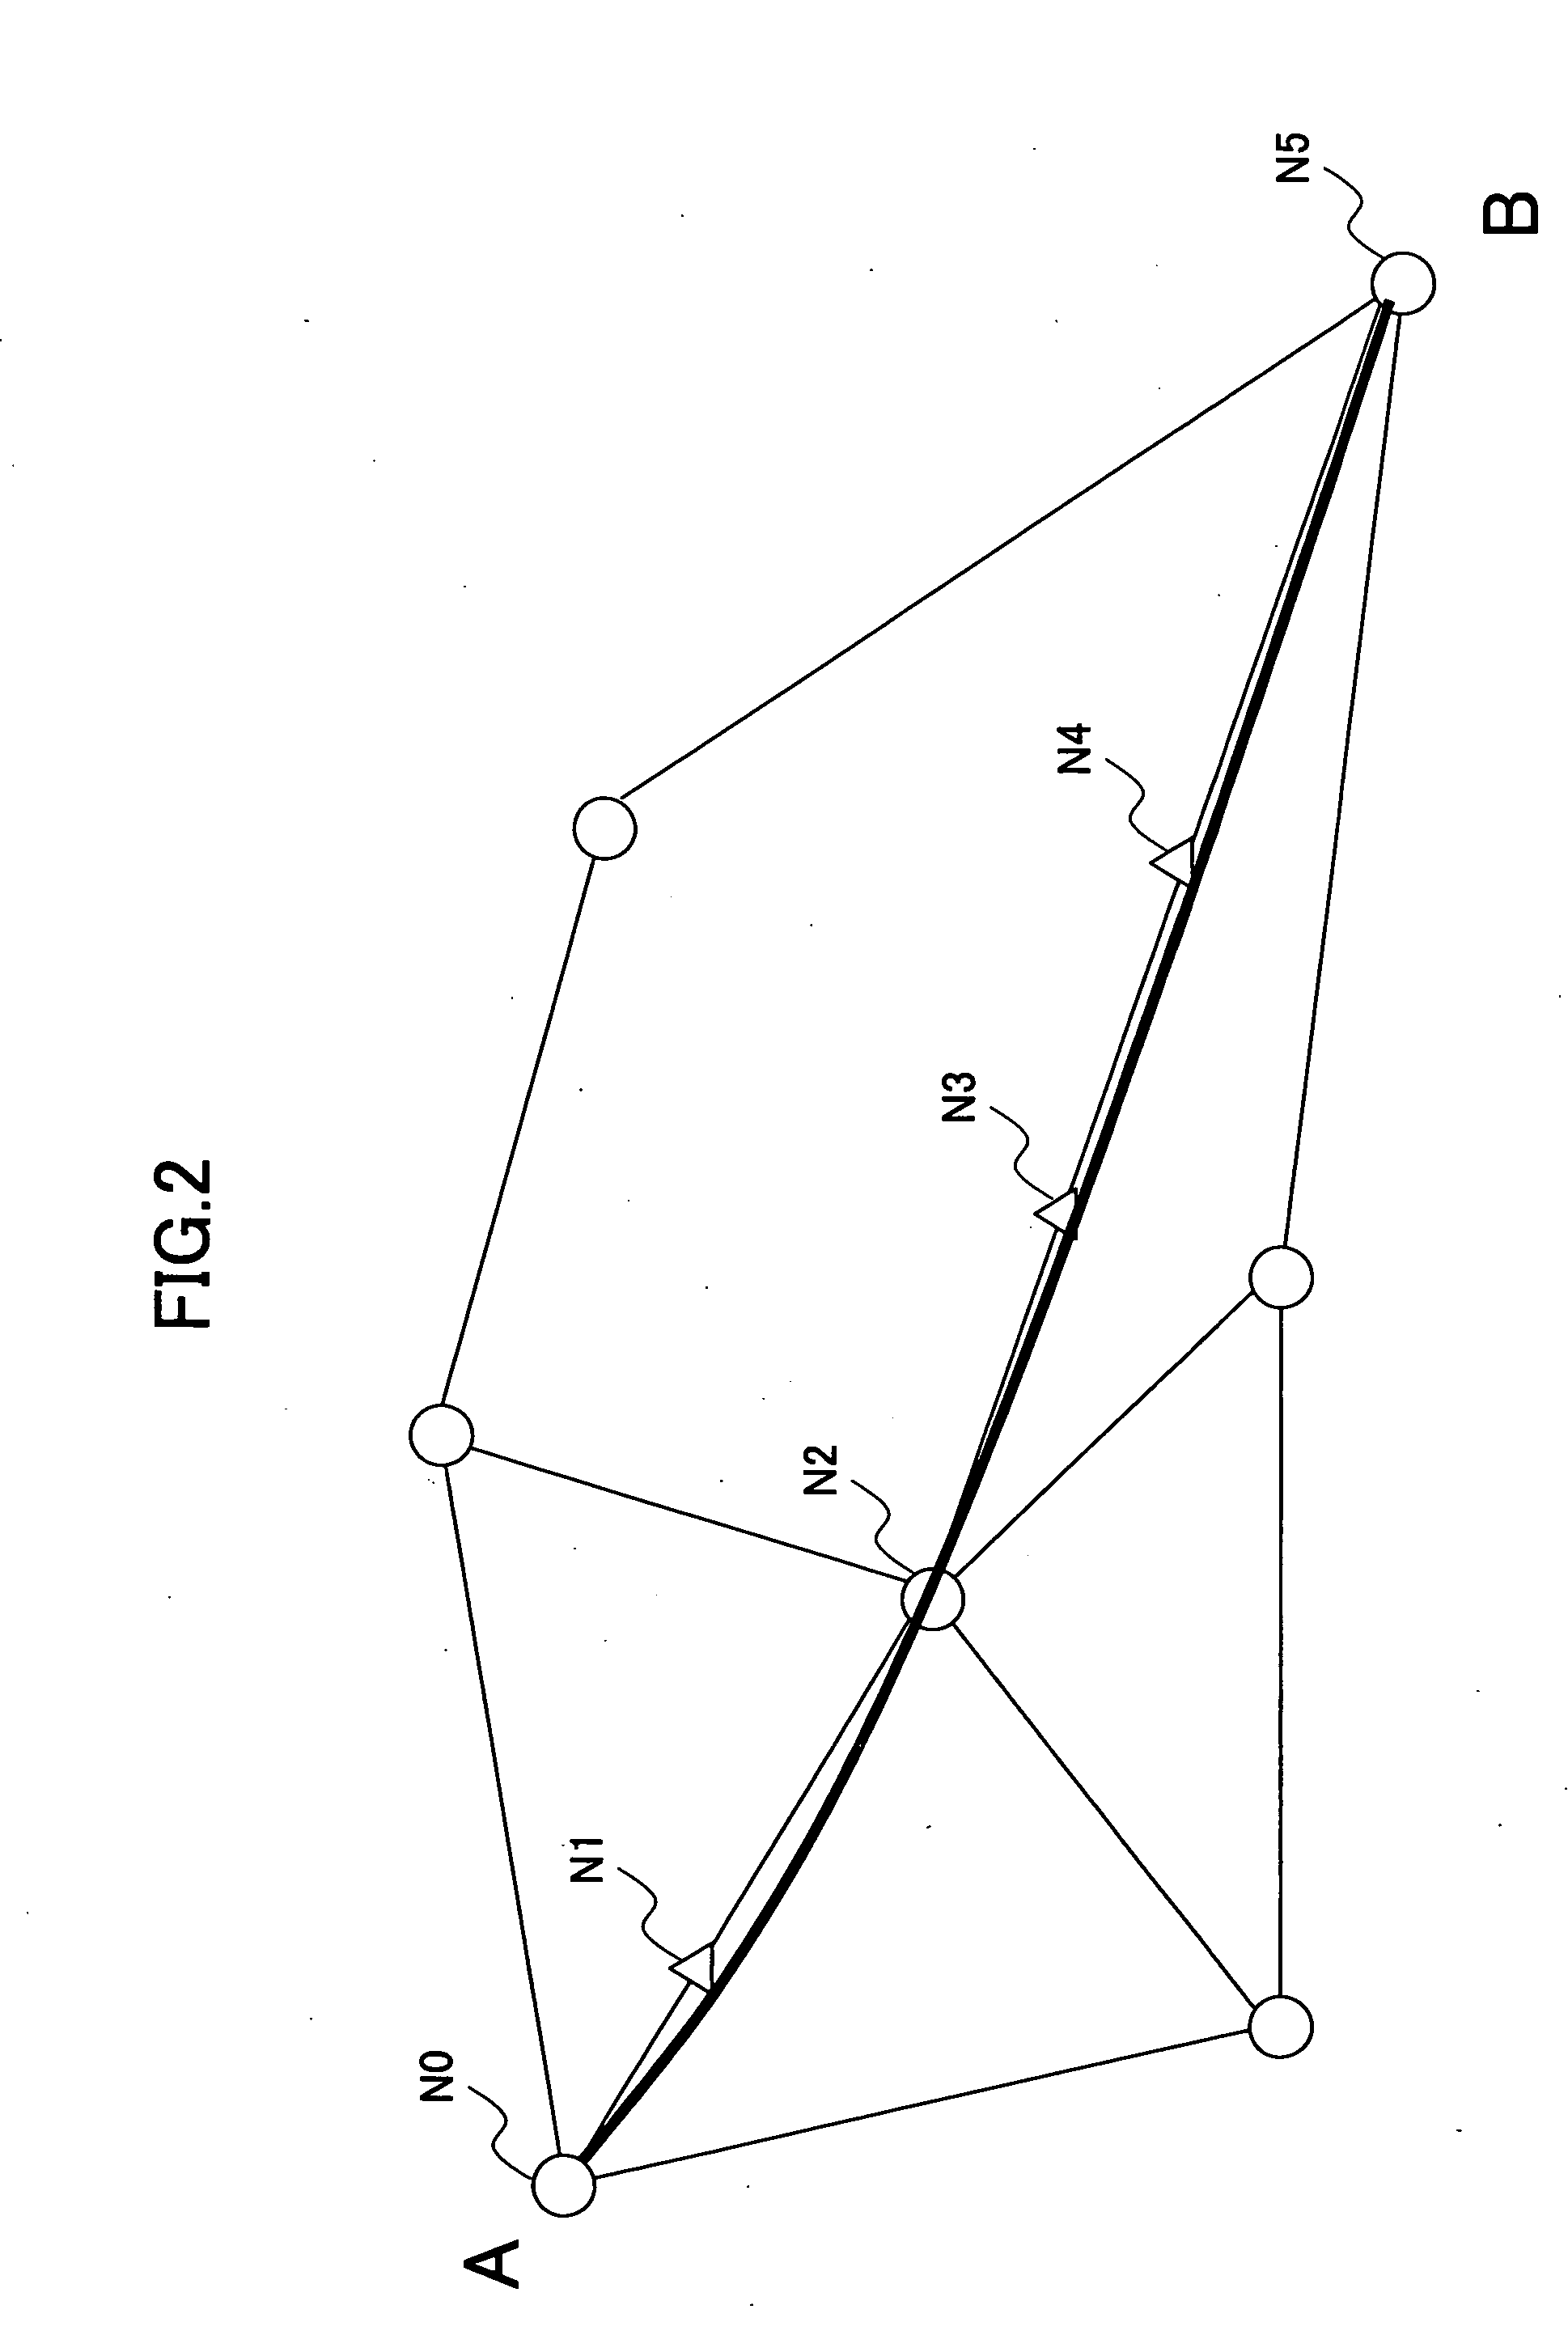 Wavelength dispersion compensation design method and a system thereof